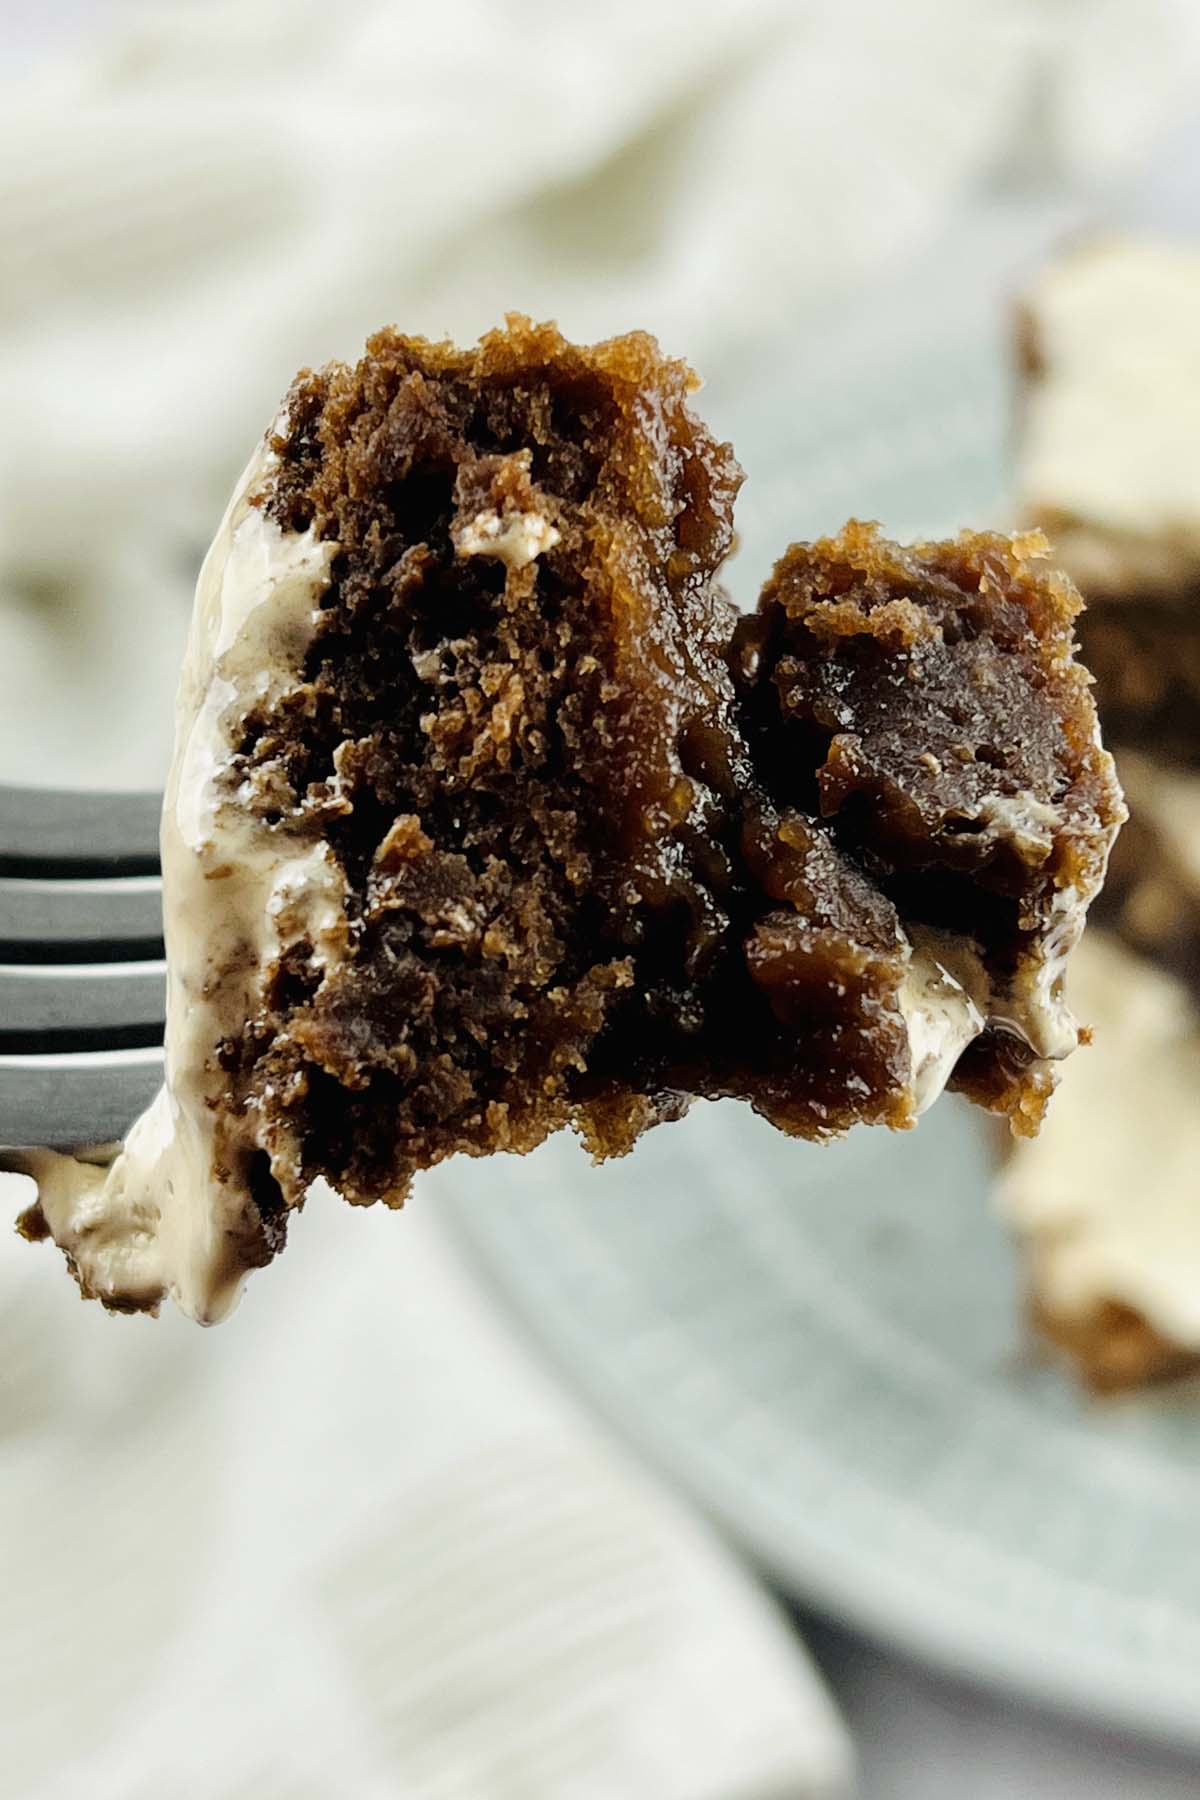 Piece of brownie on a fork.